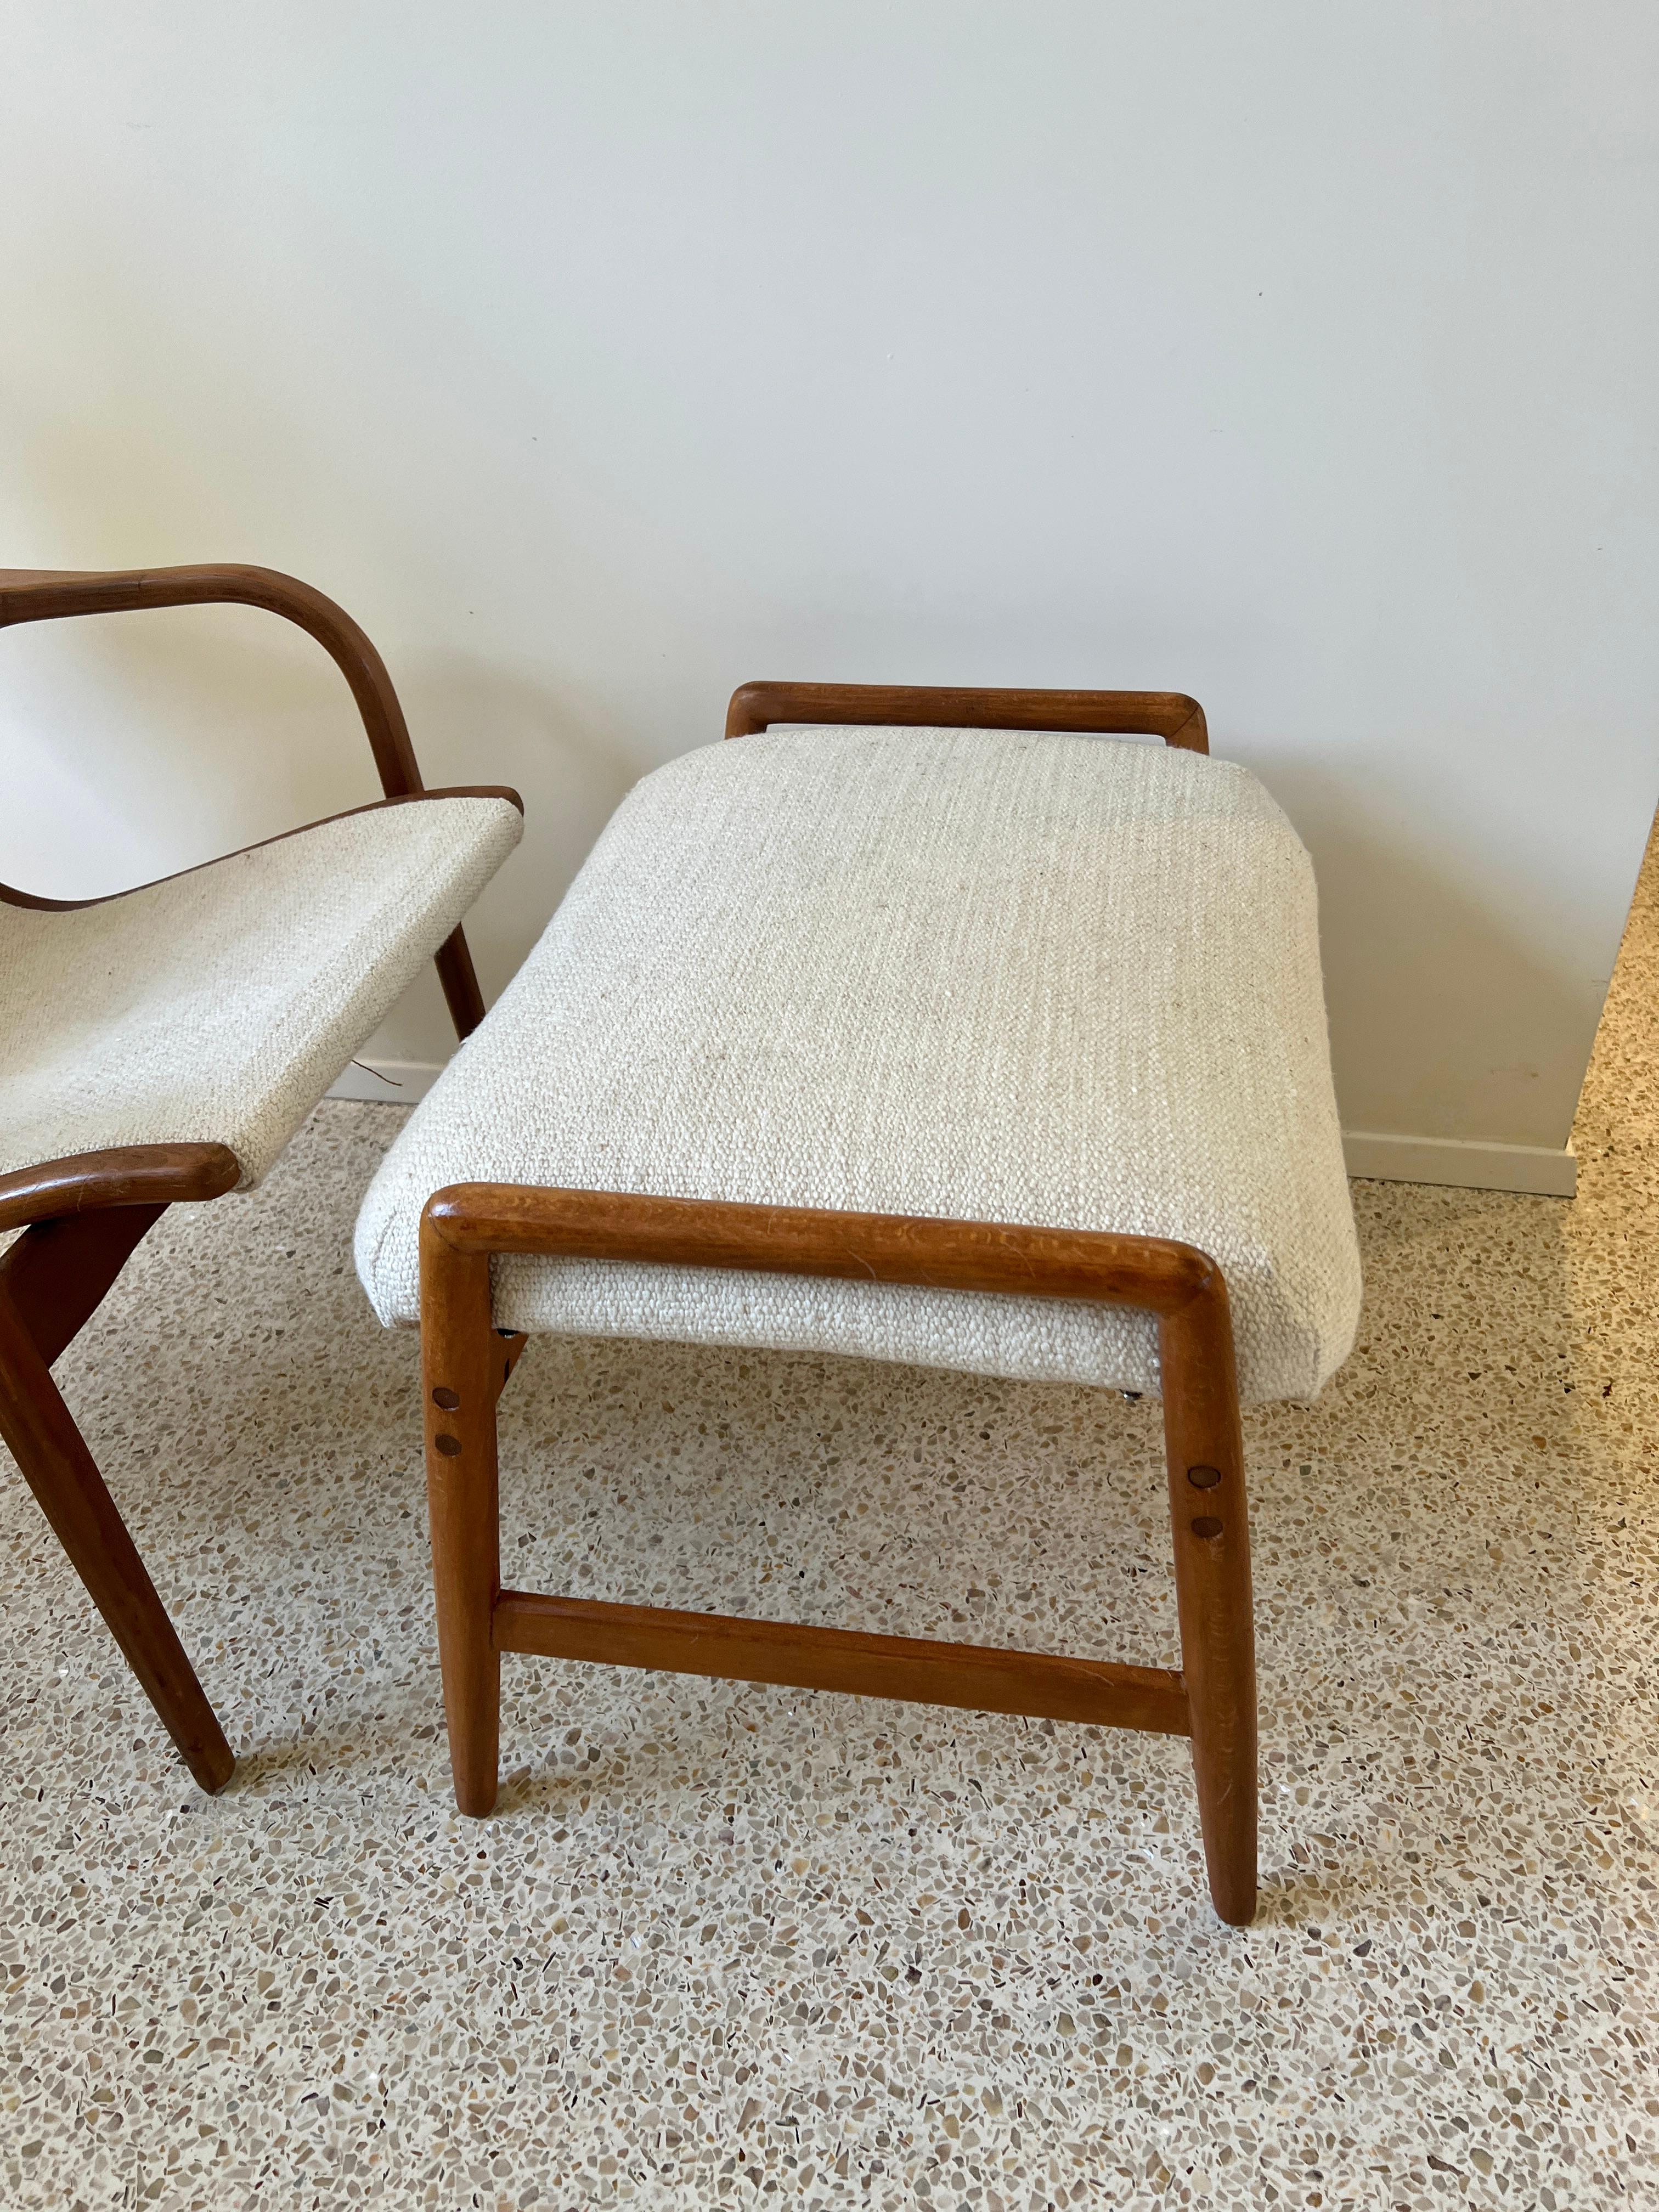 Yngve Ekström Lamino Armchair with Stool / Ottoman for Swedese Circa 1950 In Good Condition For Sale In Los Angeles, CA